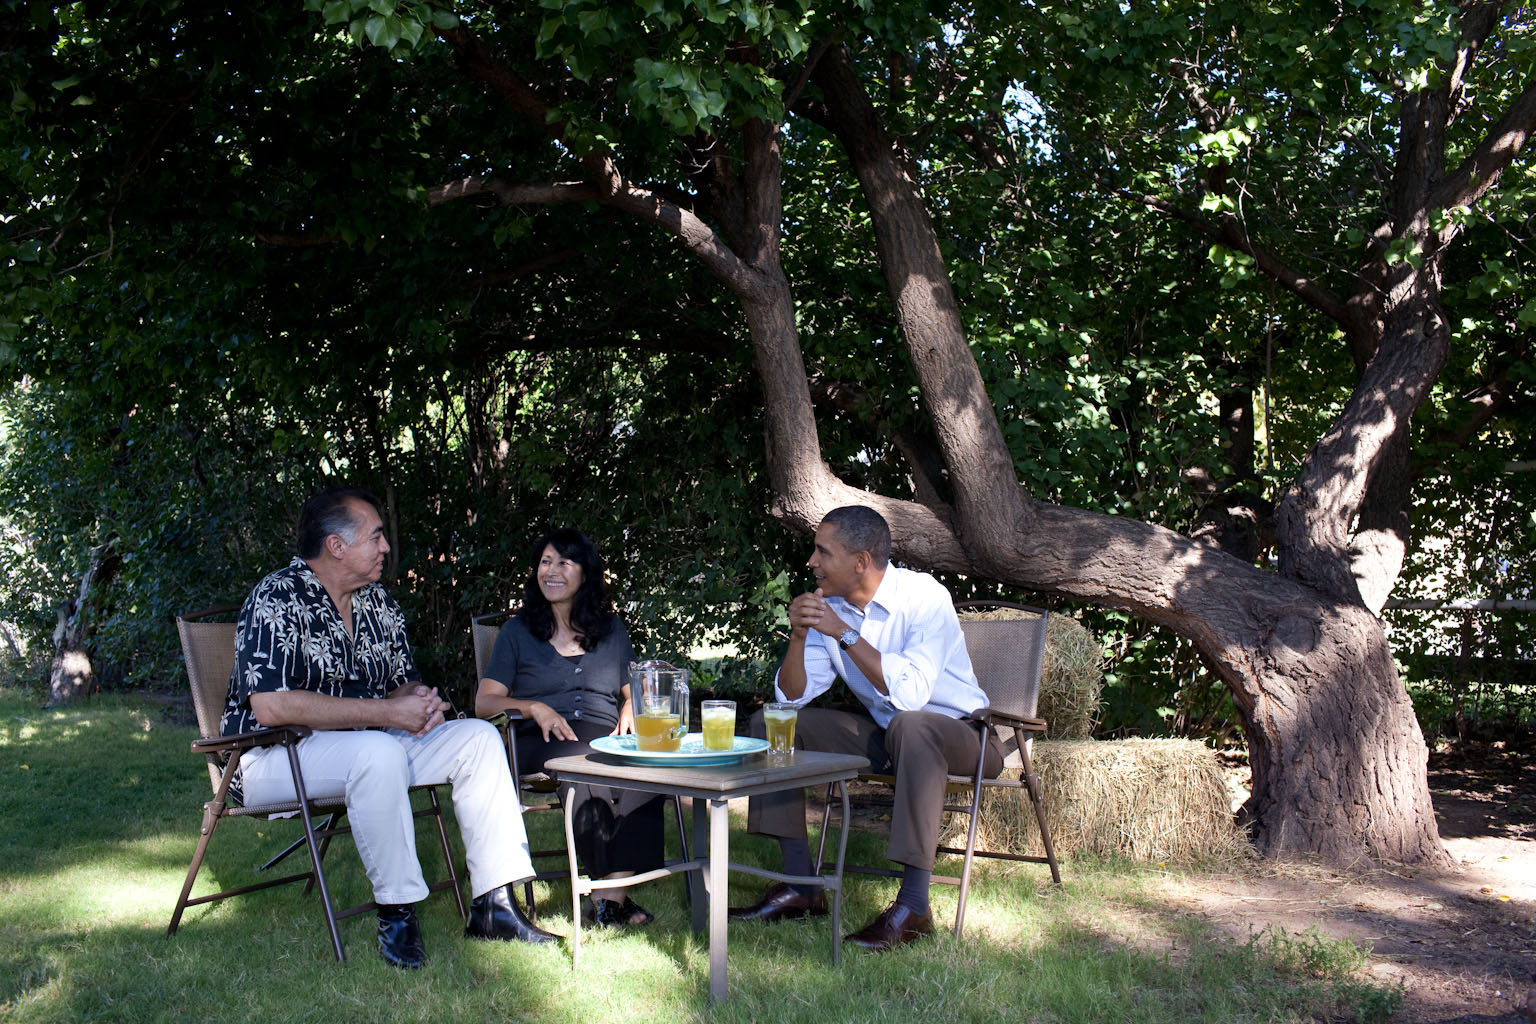 President Barack Obama Meets with Andy and Etta Cavalier at their Home in Albuquerque, New Mexico